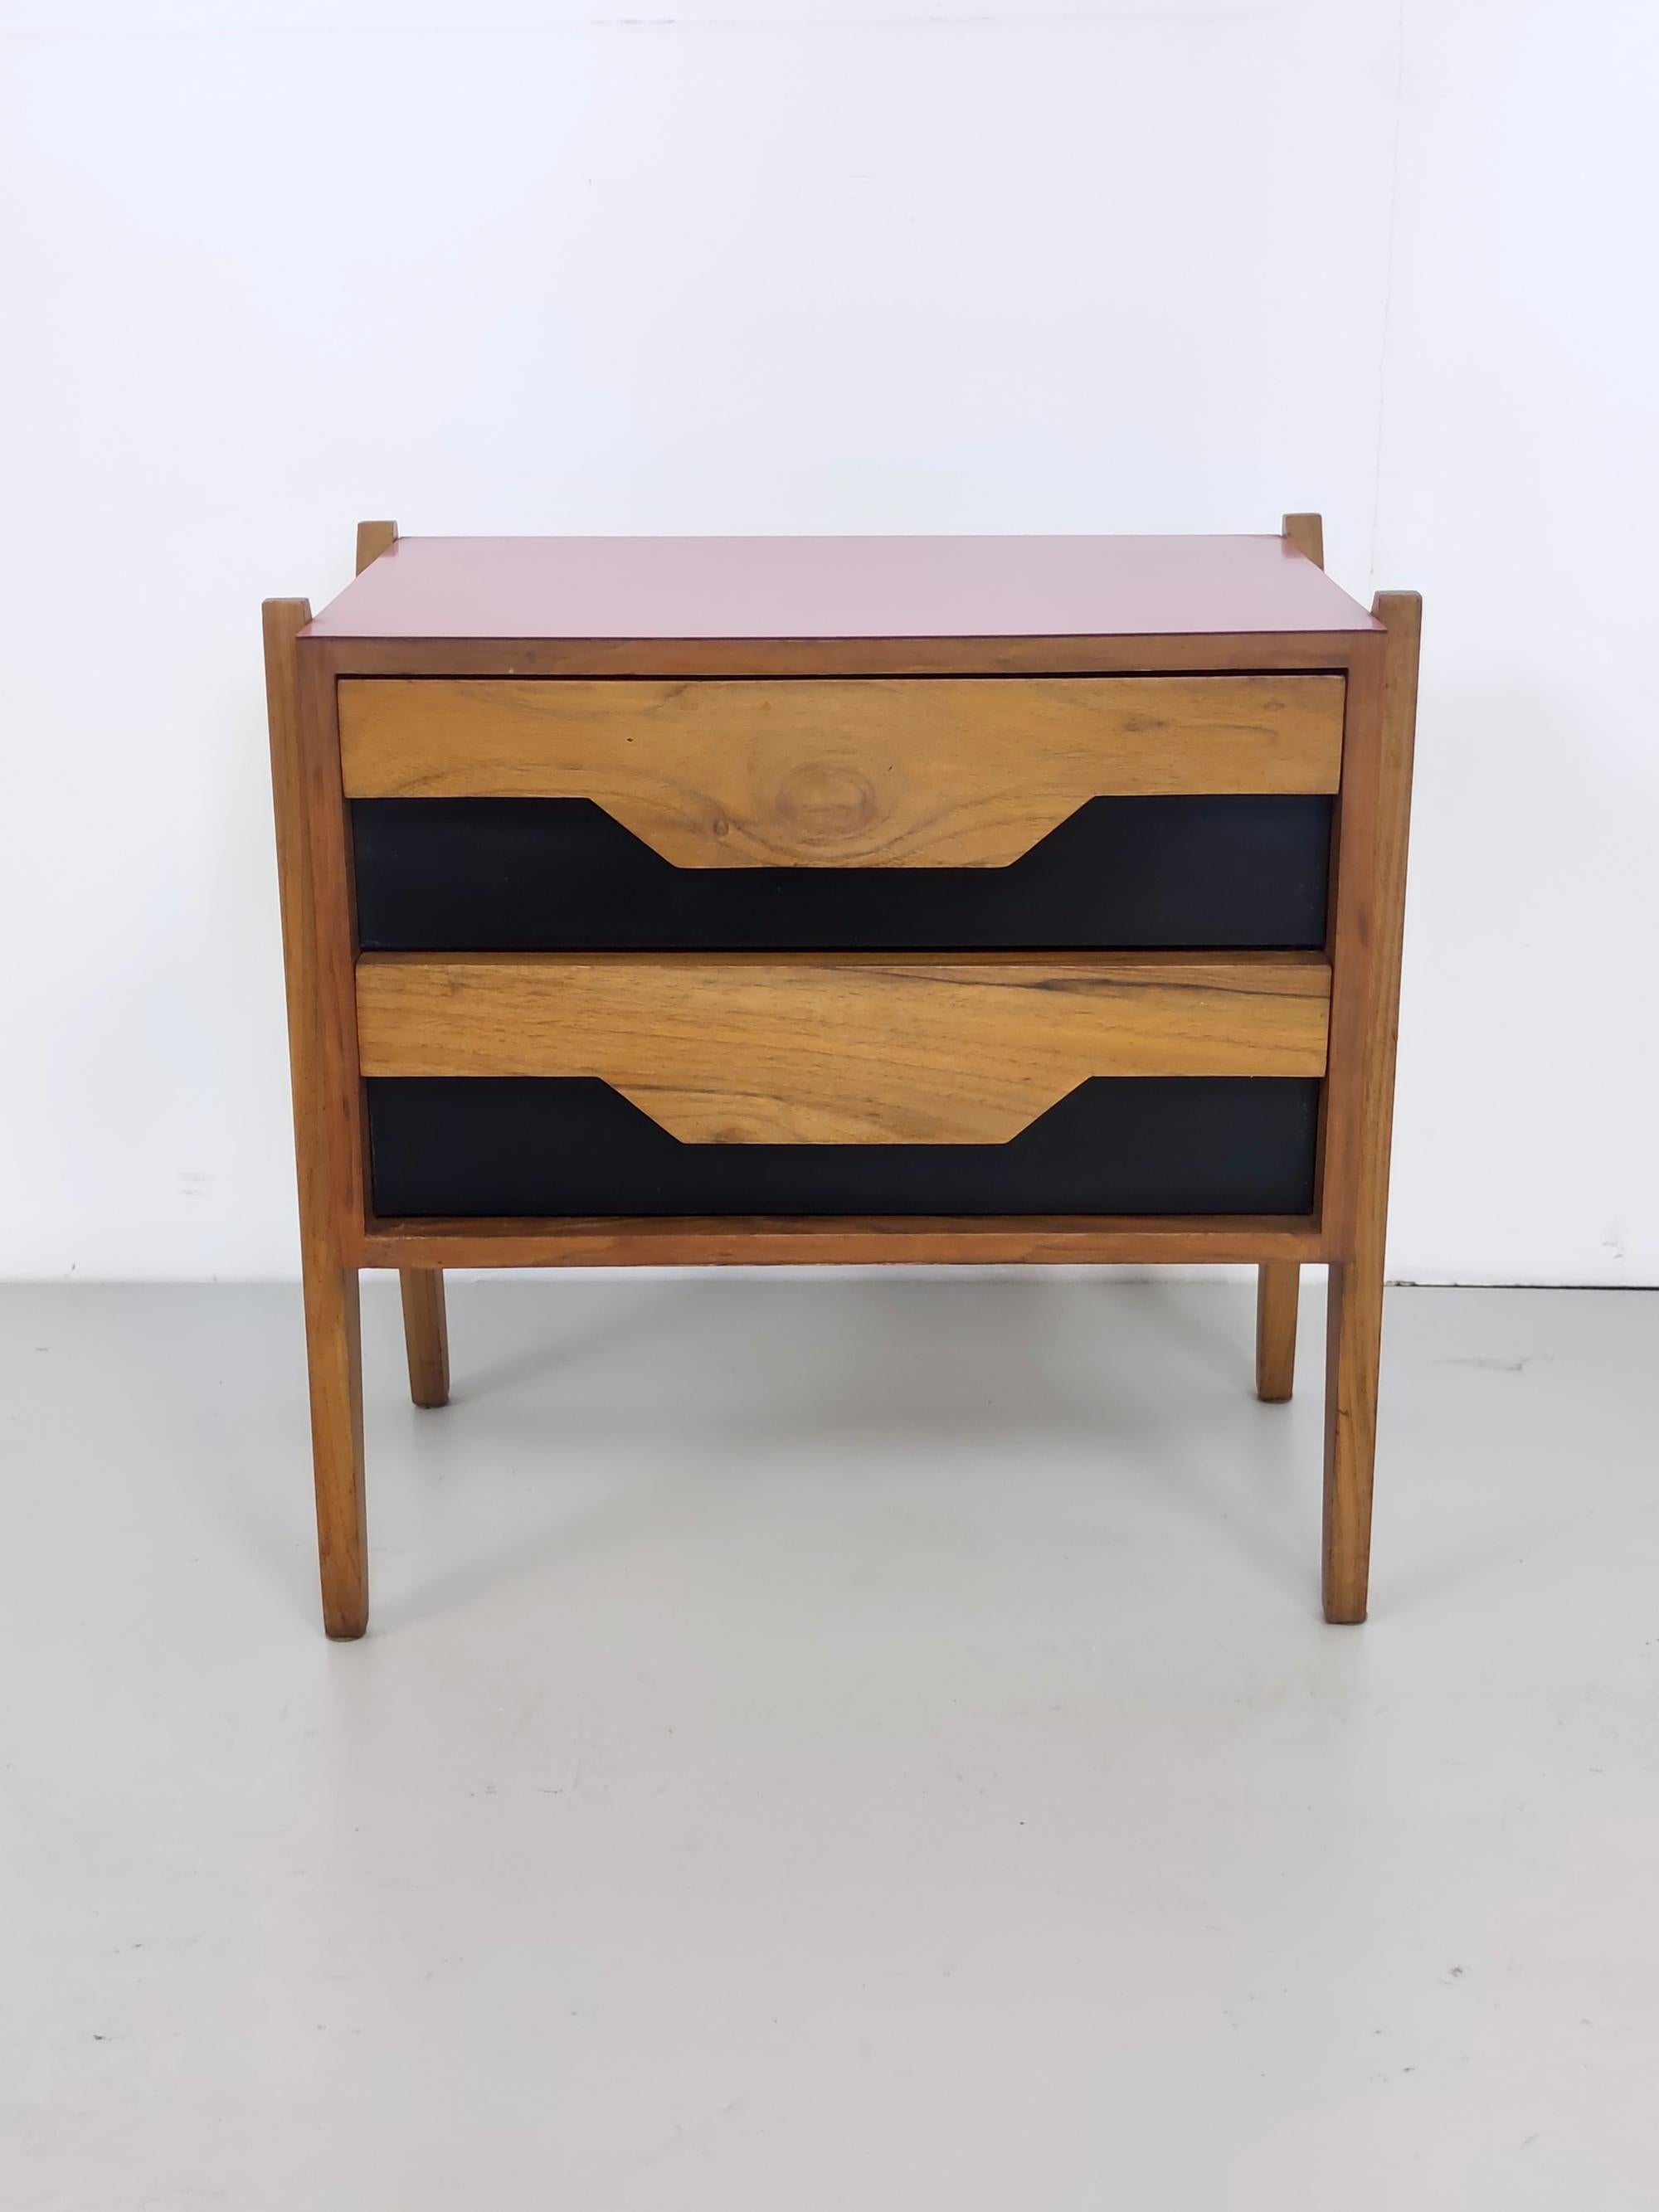 Italian Vintage Walnut Nightstand attr. to Ico Parisi with a Pink Top and Black Drawers For Sale